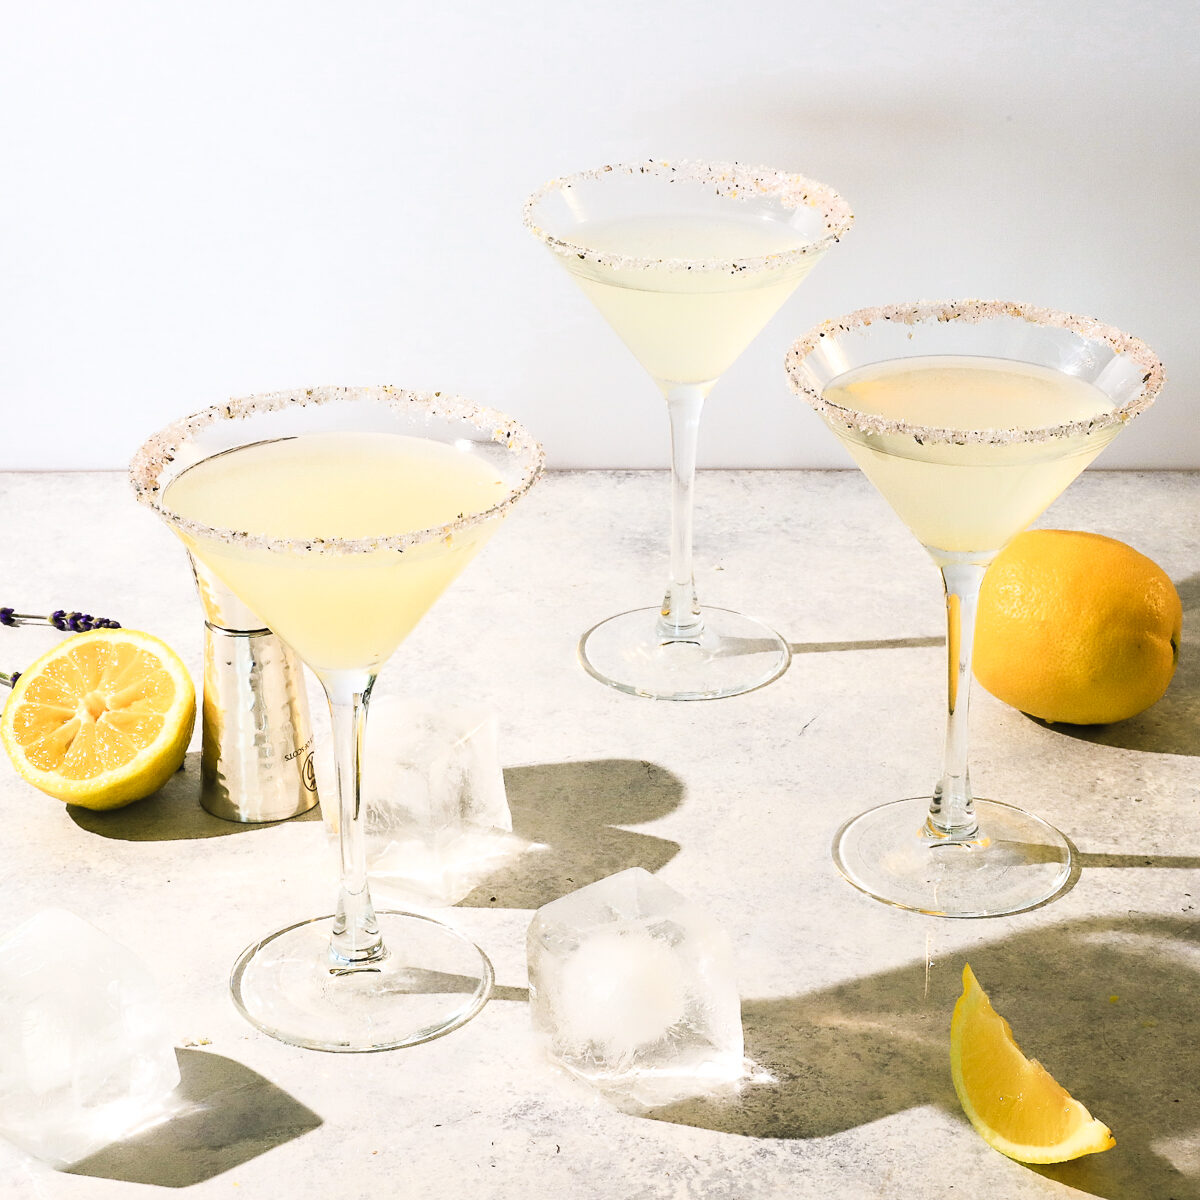 Three martini glasses with lavender sugar rims and pale yellow cocktails poured in them. There is a lemon and cut lemons and ice cubs around on the pale countertop.